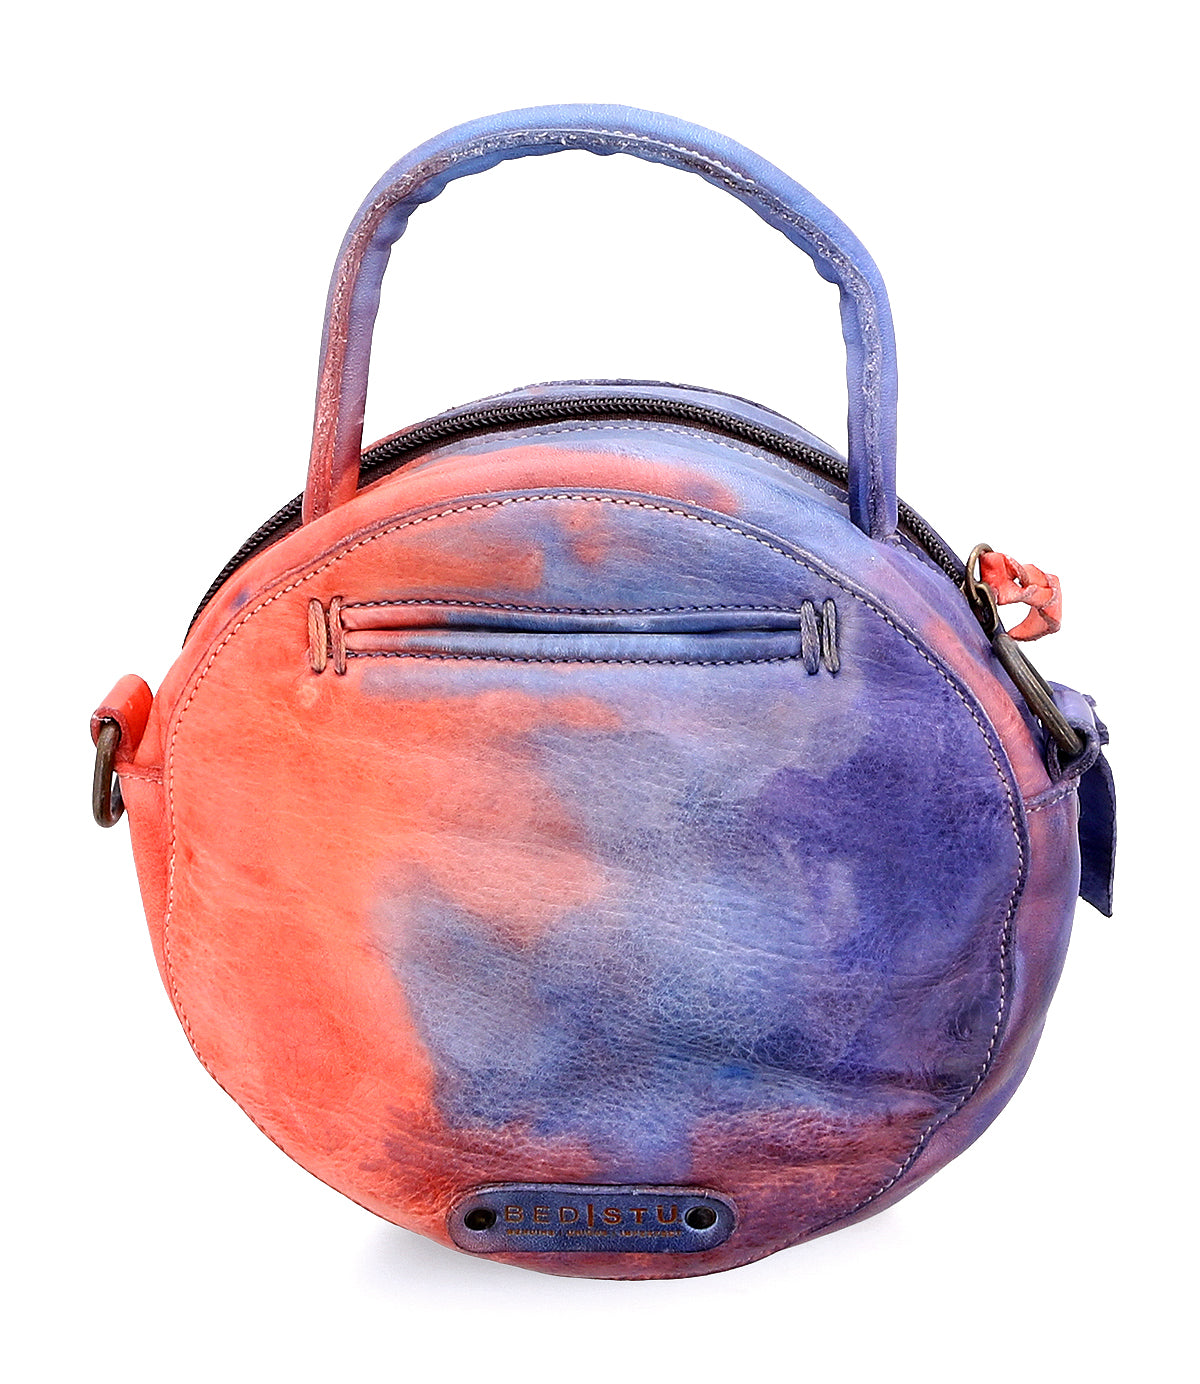 Colorful round leather Bed Stu Arenfield crossbody handbag with dual zippers and a detachable strap on a white background.